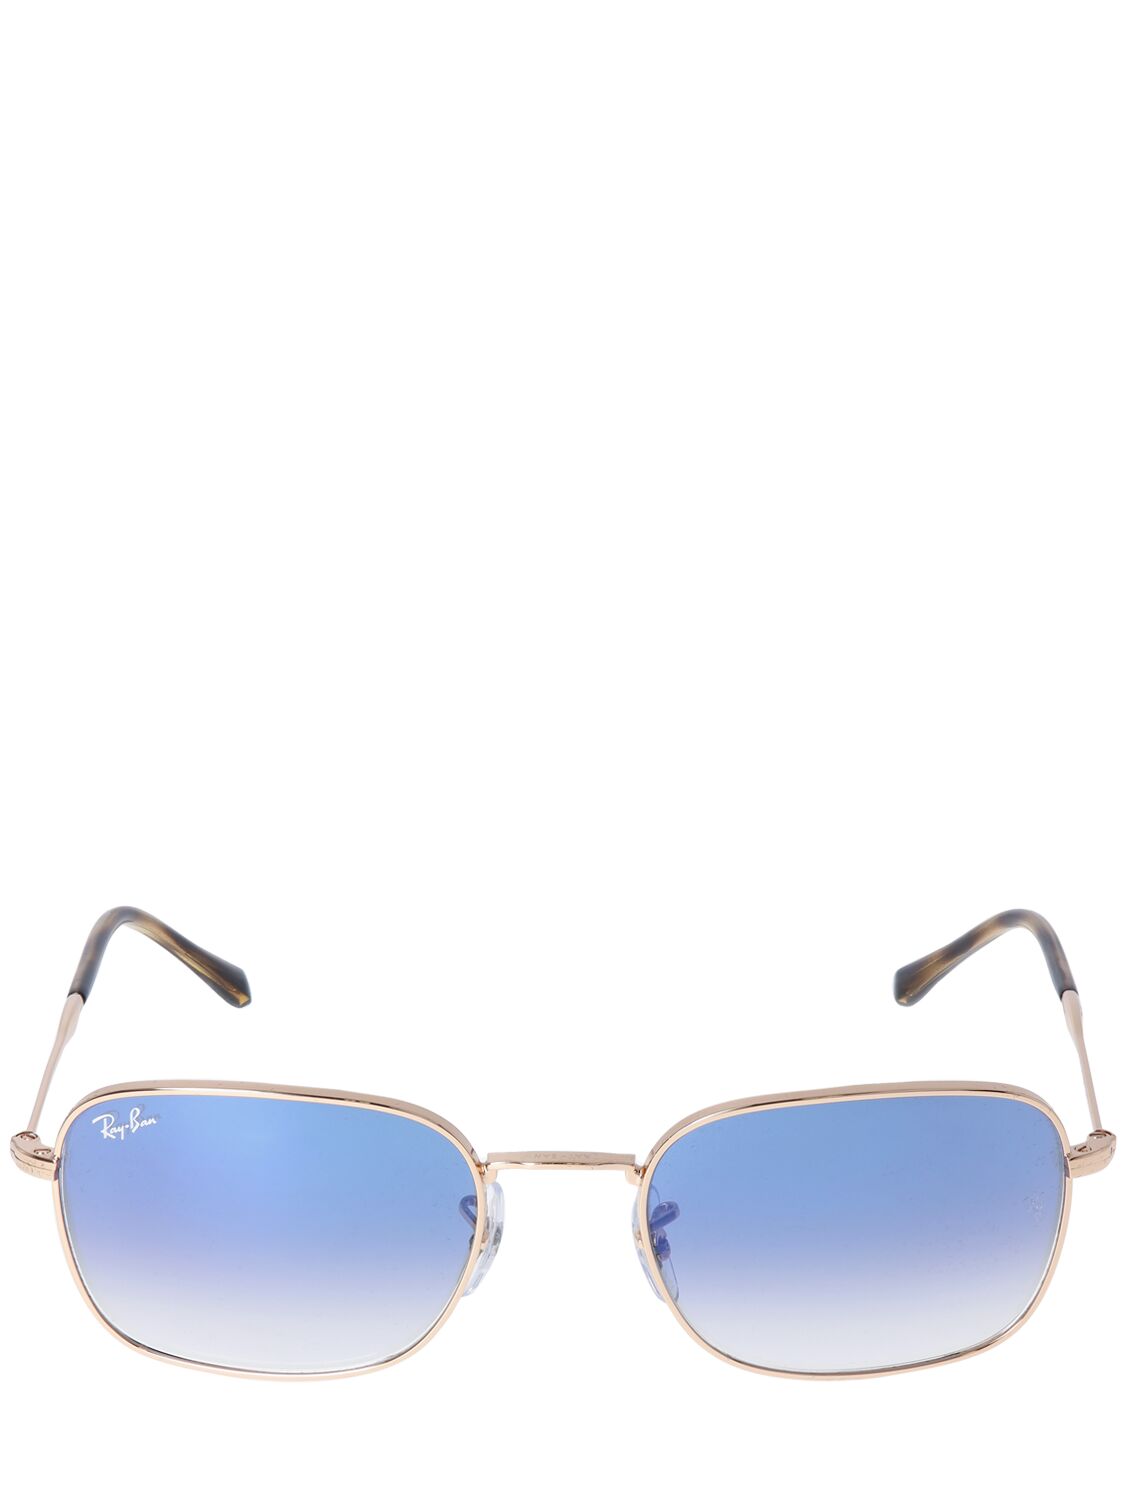 Ray Ban Metal Revamp Squared Sunglasses In Gold